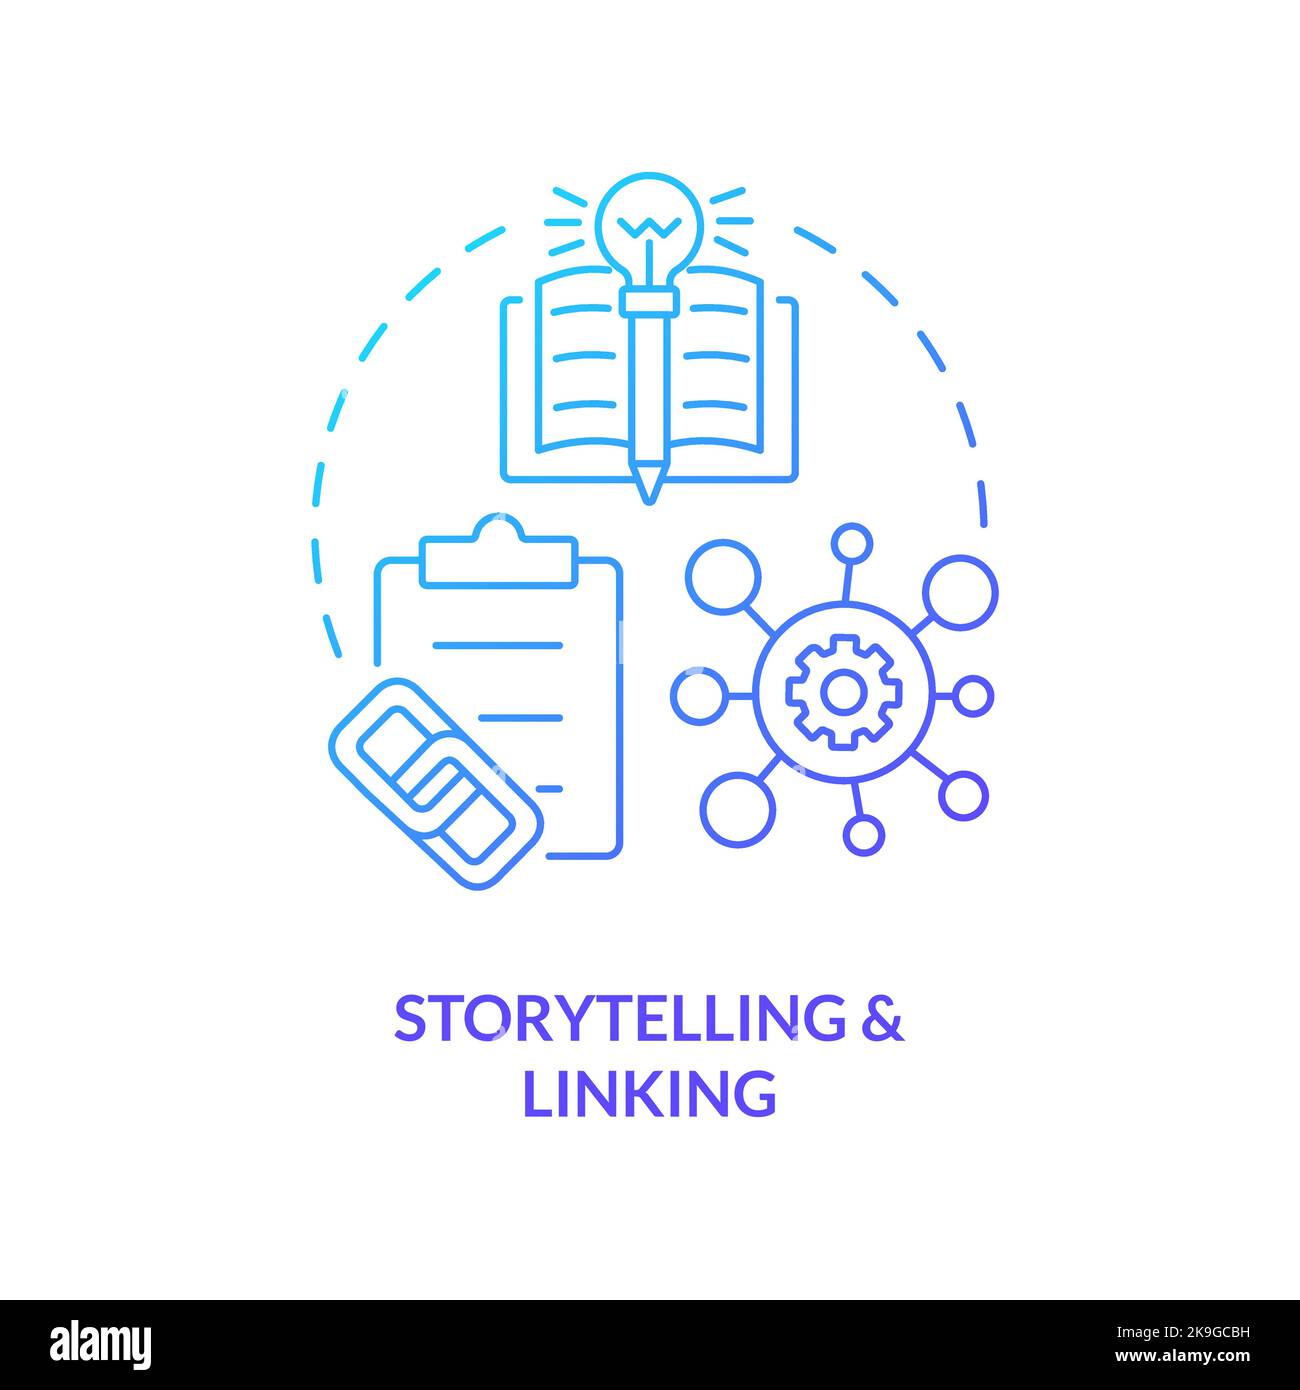 Storytelling, linking technique blue gradient concept icon Stock Vector